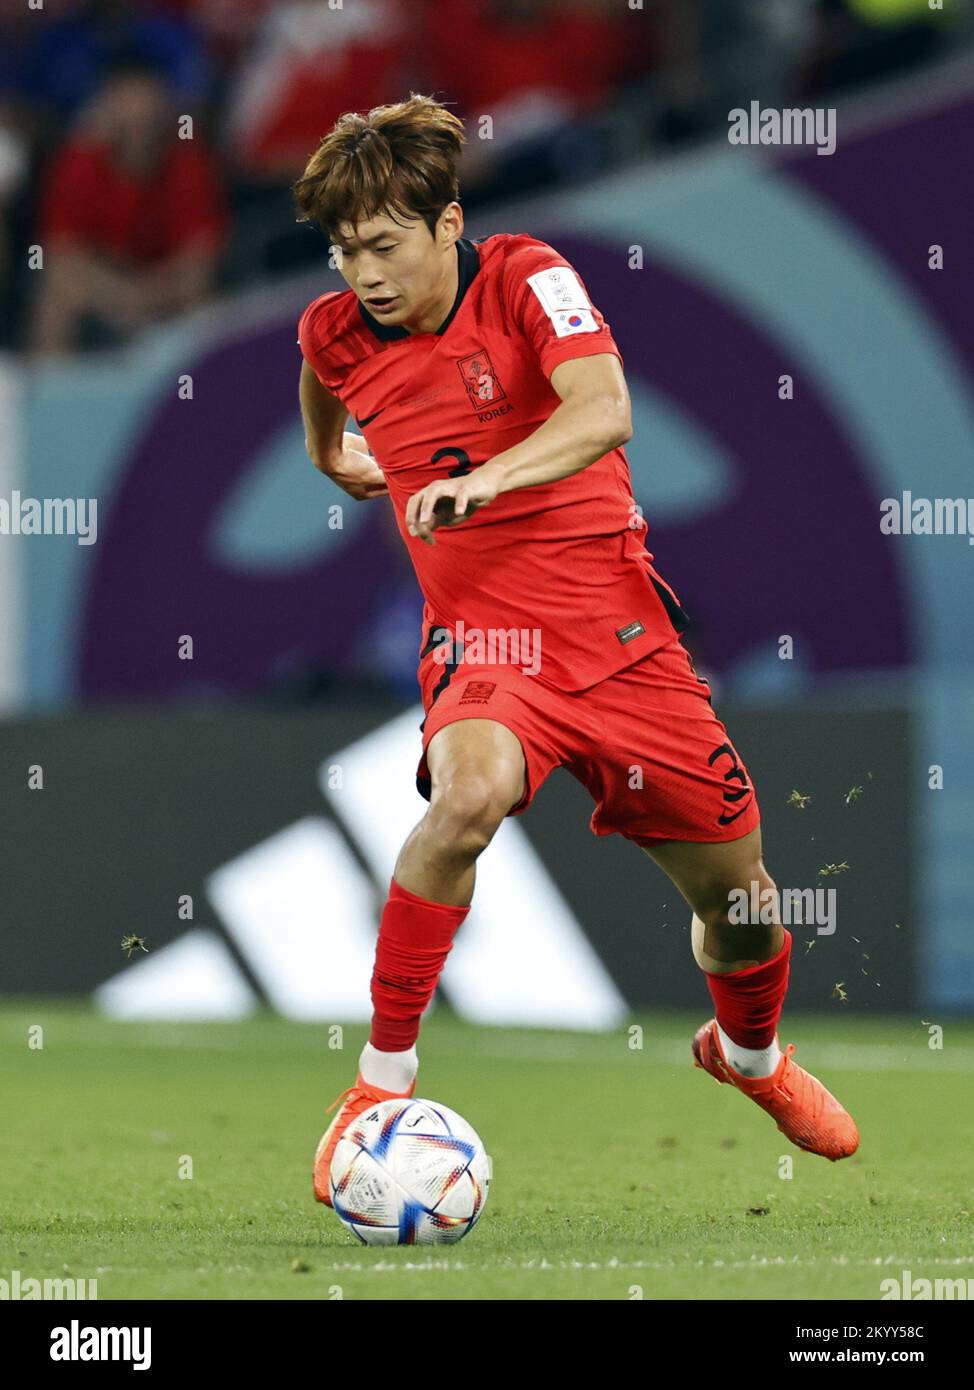 Qatar. 02nd Dec, 2022. DOHA - Jin-Su Kim of Korea Republic during the FIFA World Cup Qatar 2022 group H match between South Korea and Portugal at Education City Stadium on December 2, 2022 in Doha, Qatar. AP | Dutch Height | MAURICE OF STONE Credit: ANP/Alamy Live News Stock Photo